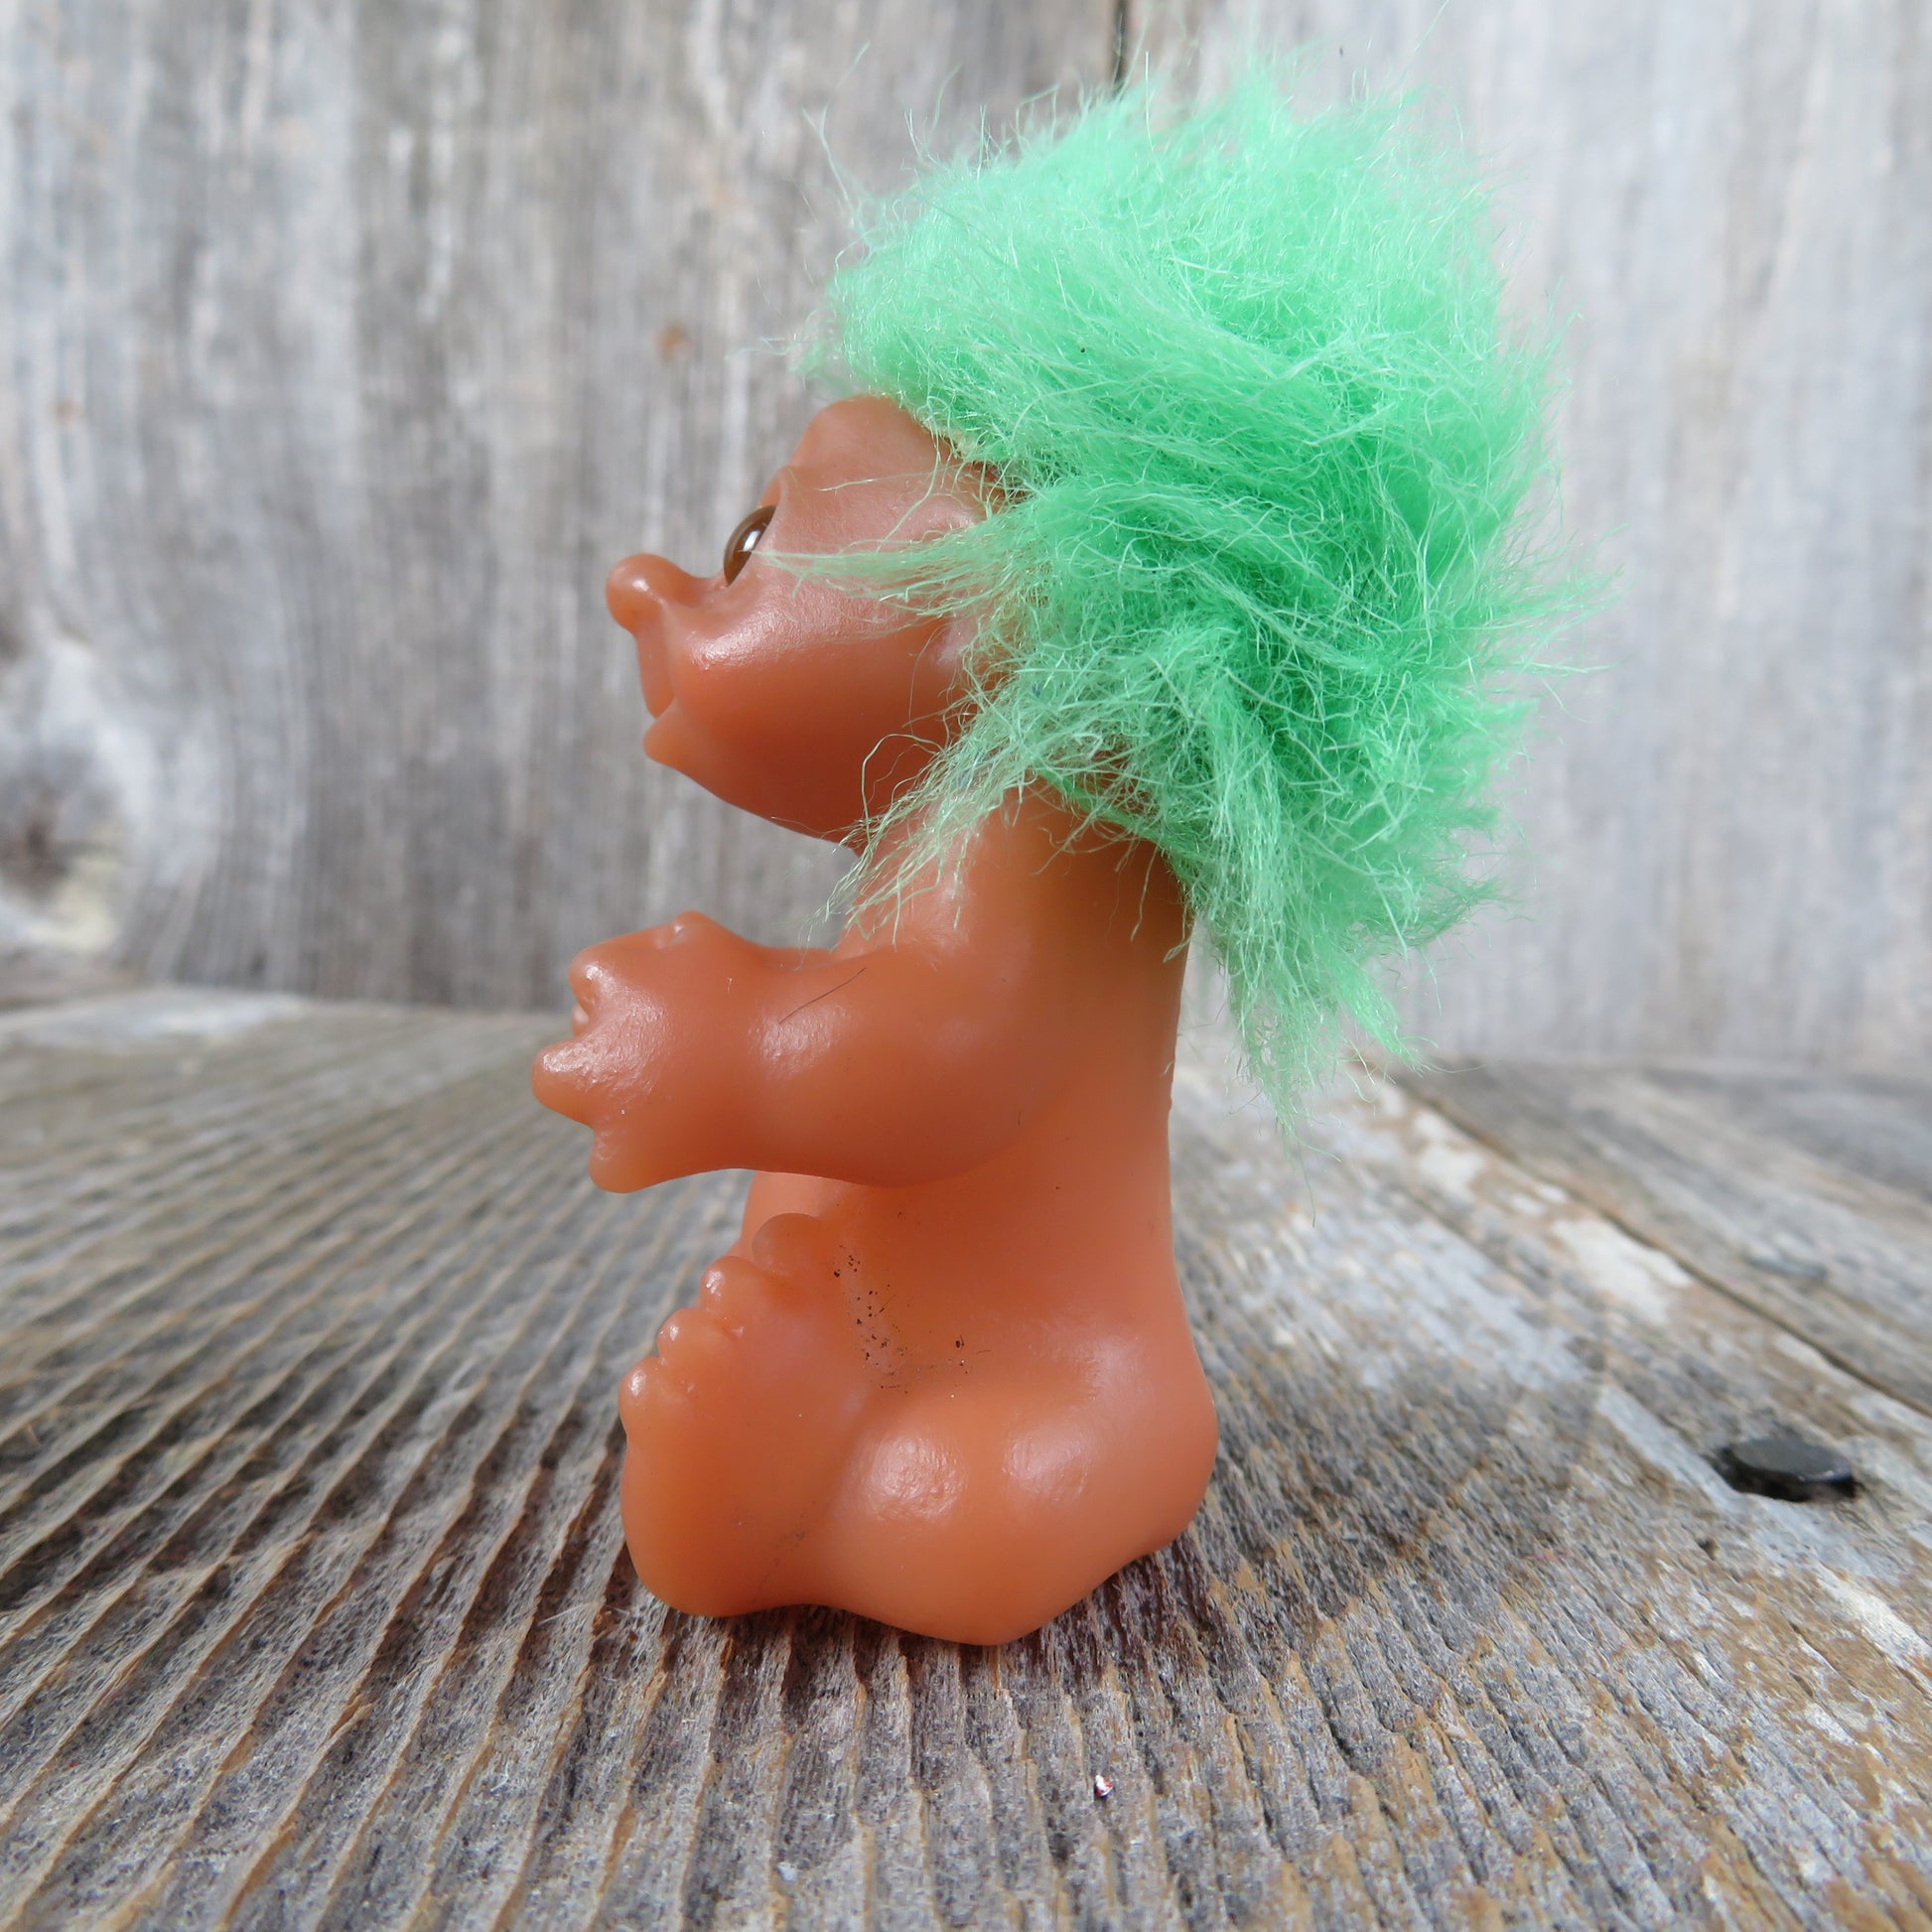 Vintage Baby Troll Doll Green Hair Infant Dam Norfin Naked 2.5 inches 1985 - At Grandma's Table